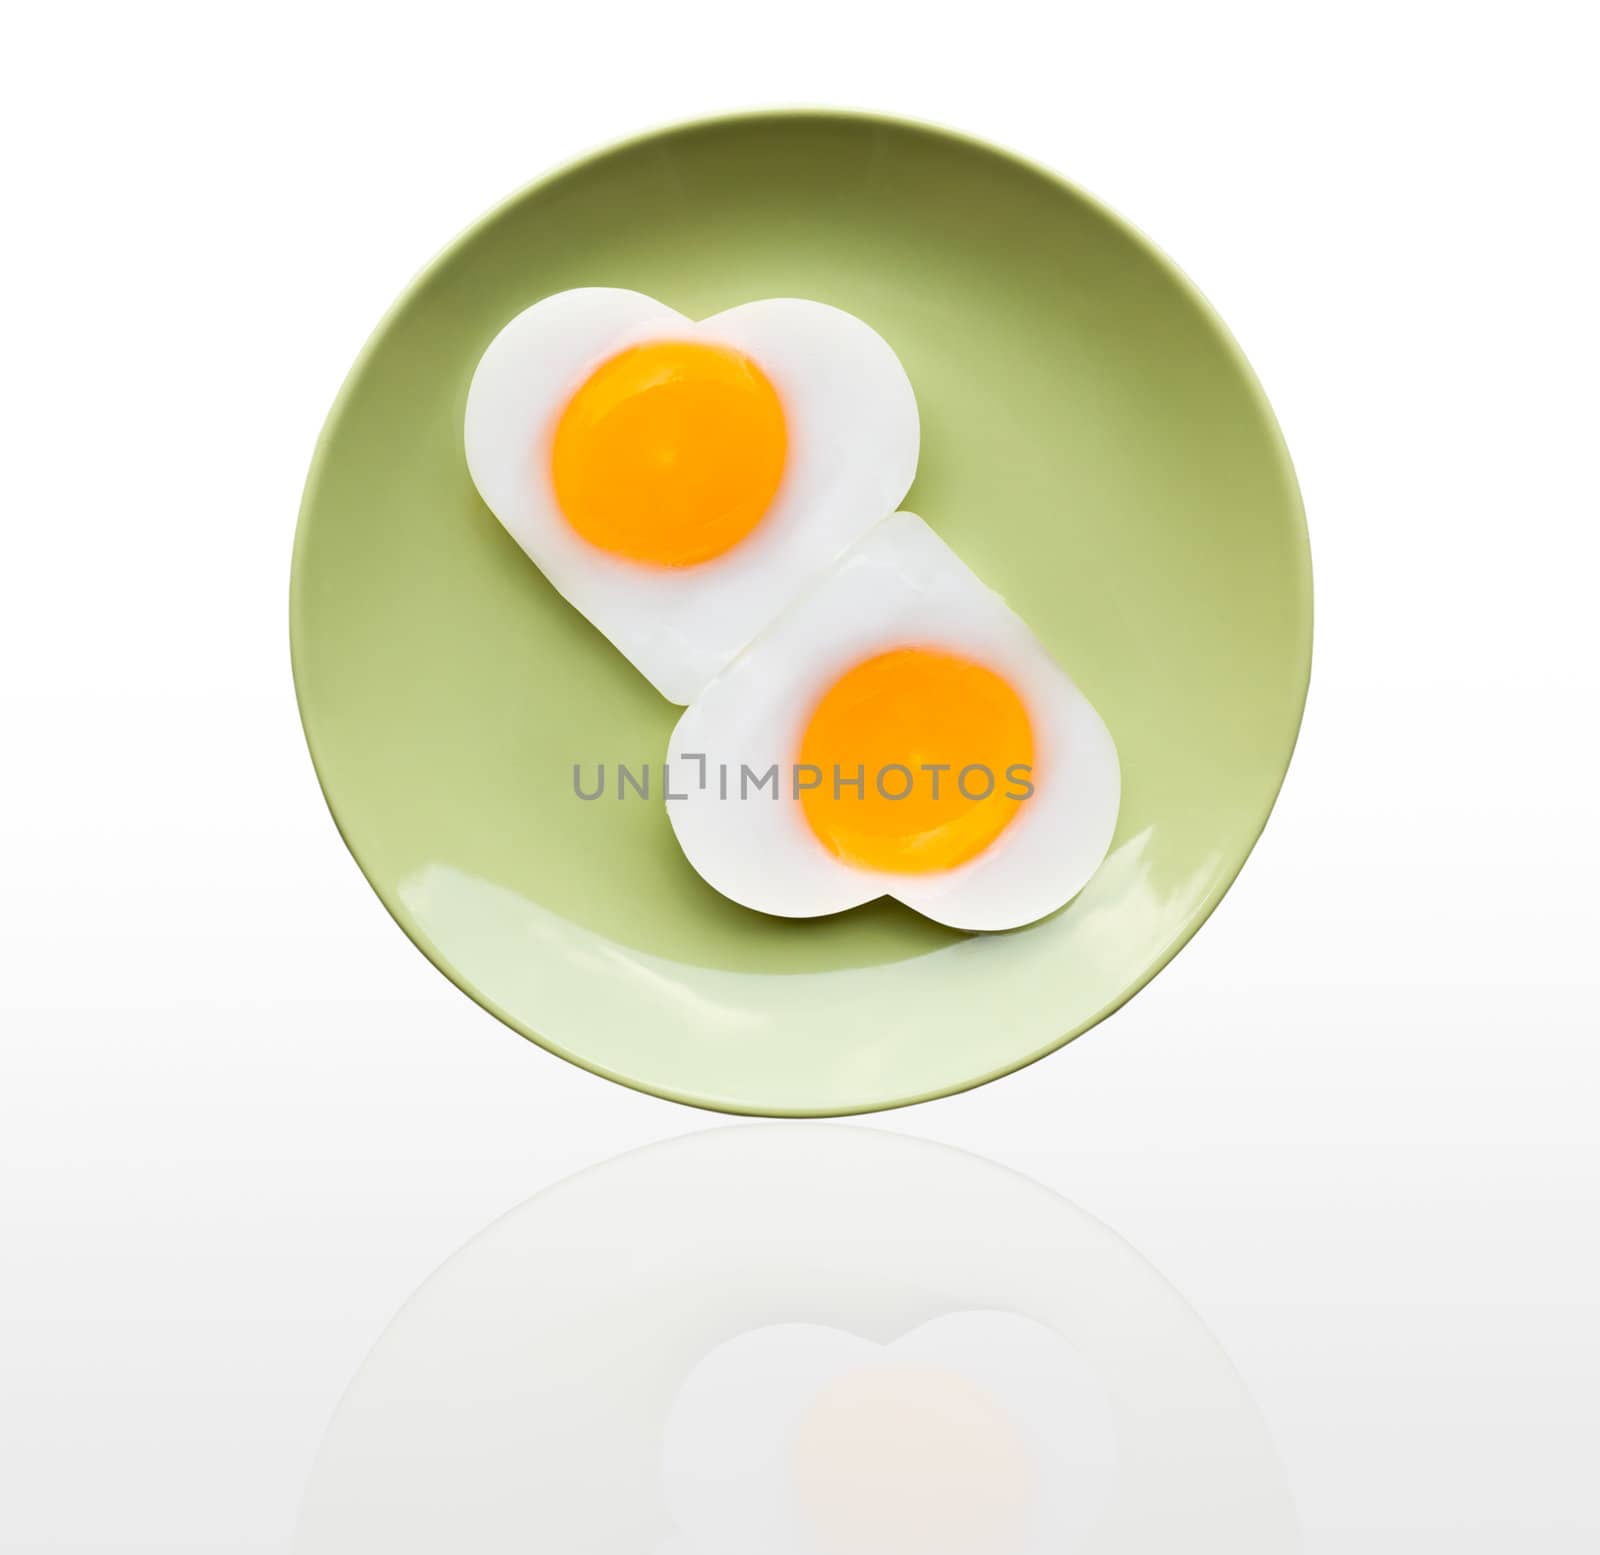 Fried egg heart on green dish on white background